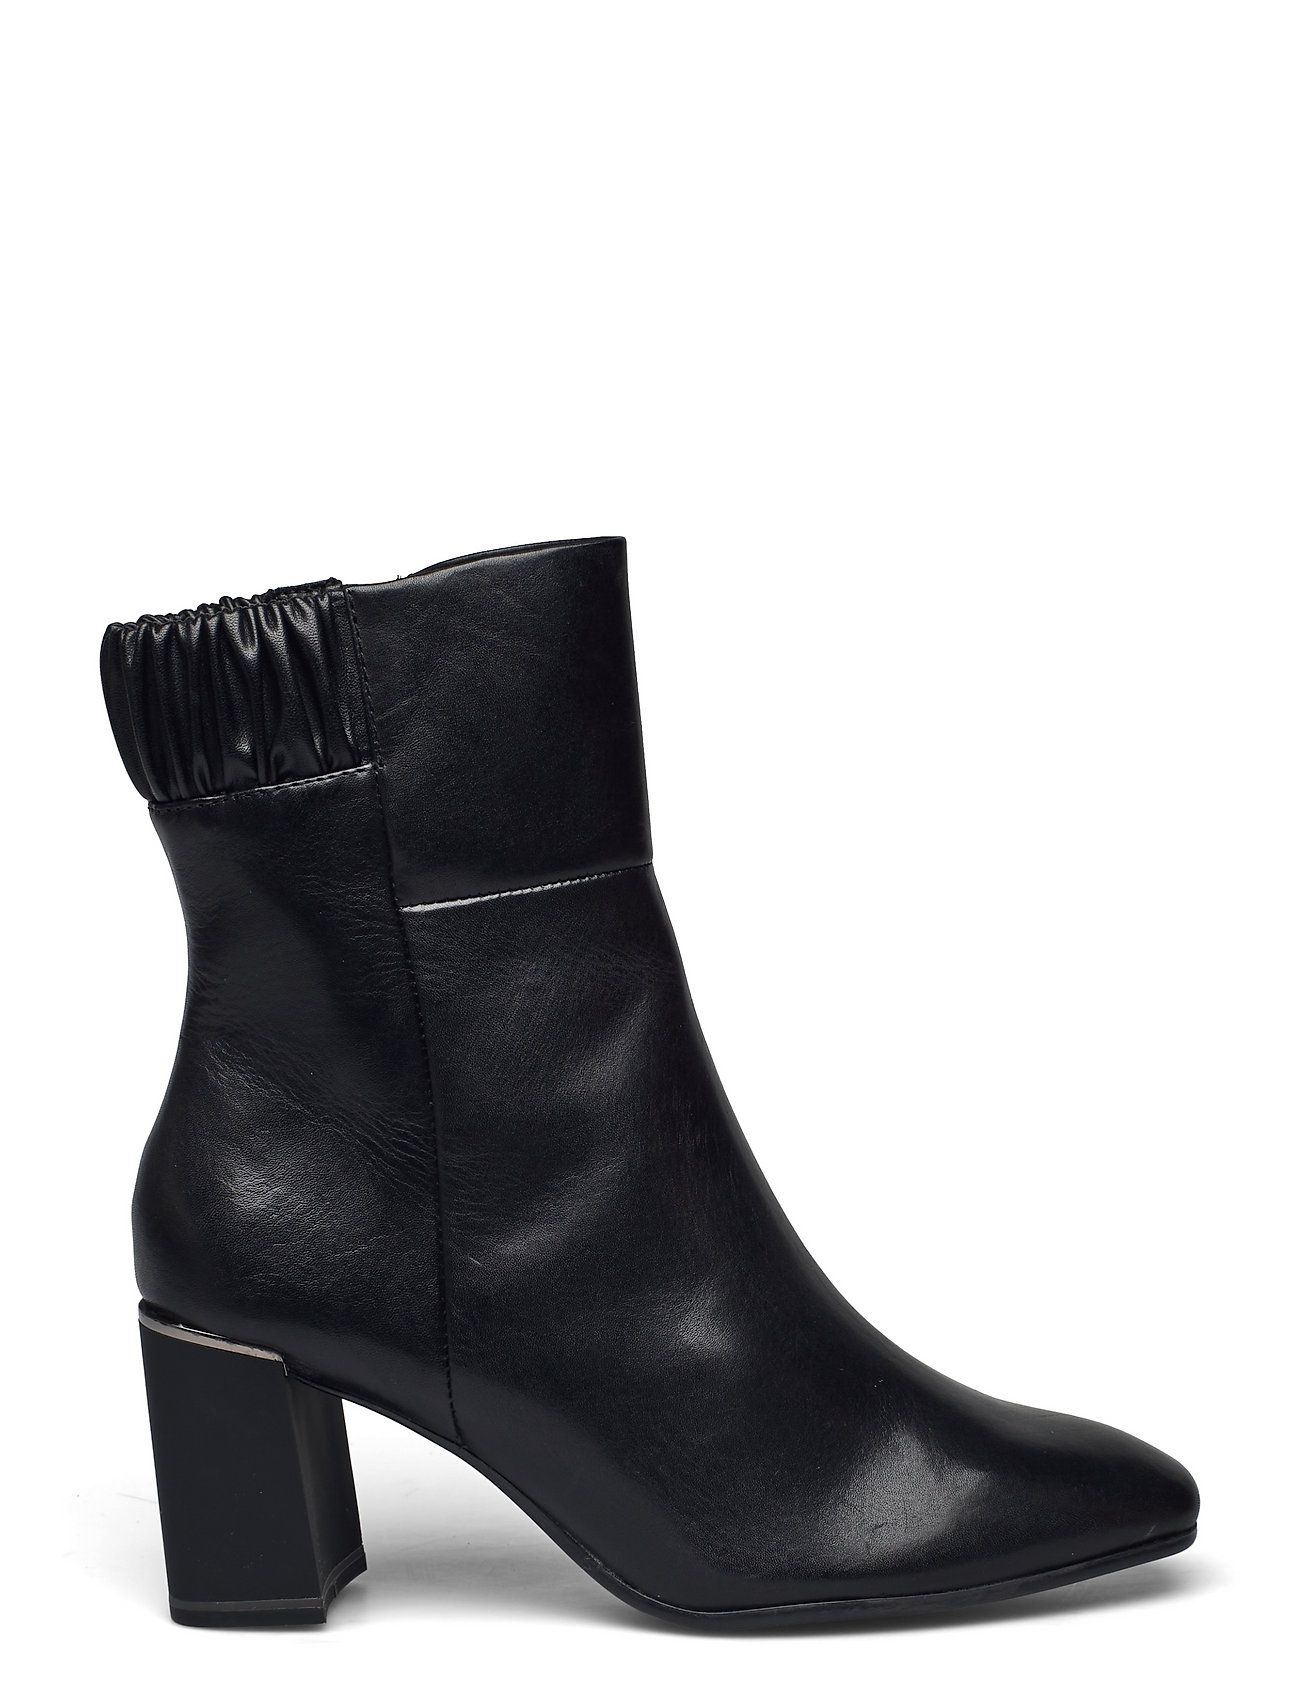 Woms Boots - Genova Shoes Boots Ankle Boots Ankle Boot - Heel Musta Tamaris